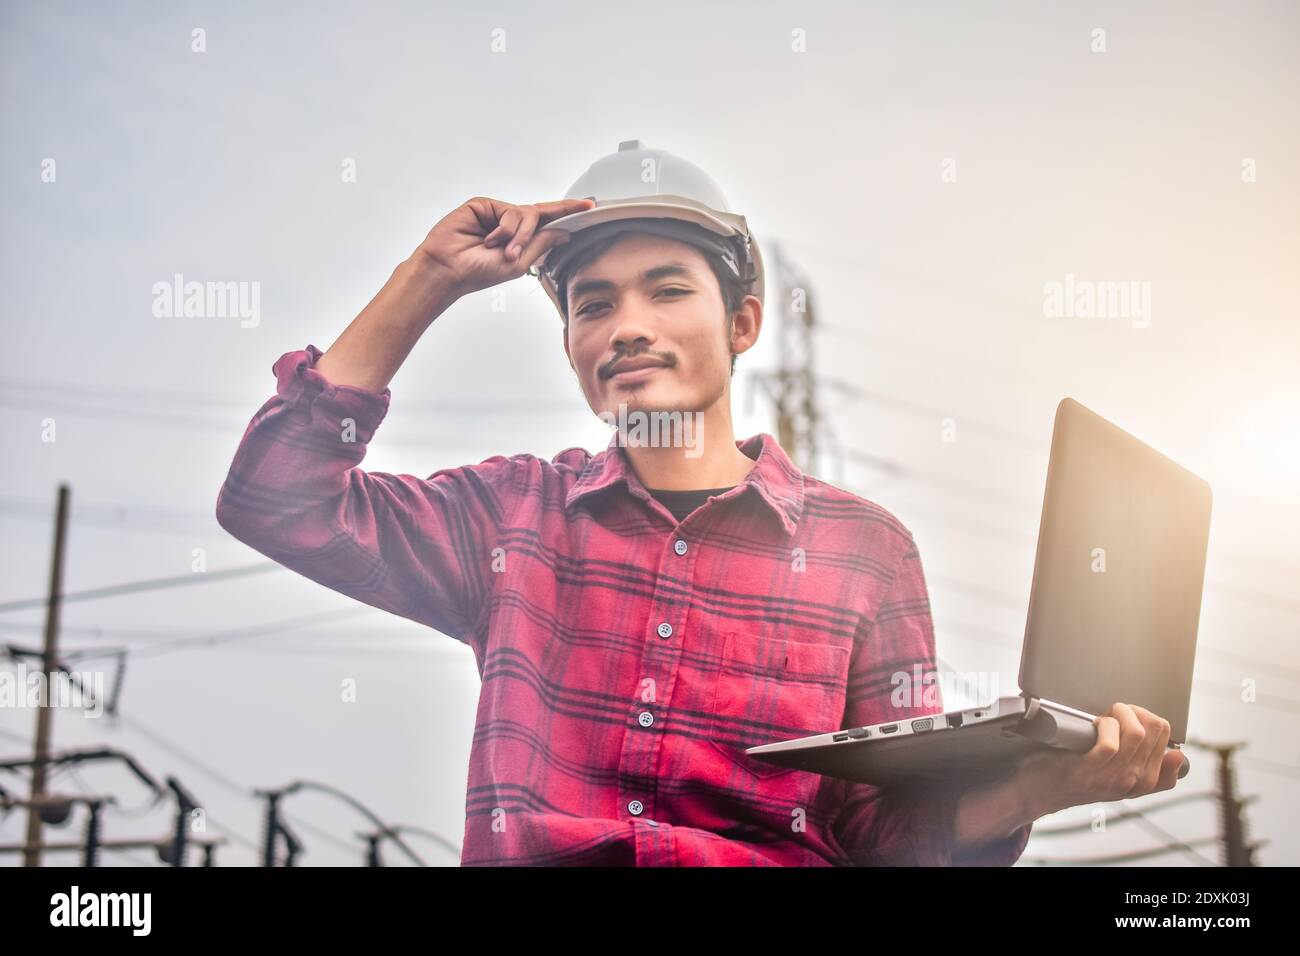 Engineer technician foreman Supervisor holding computer notebook at work place Power plant electric system background technology inspection Checking s Stock Photo